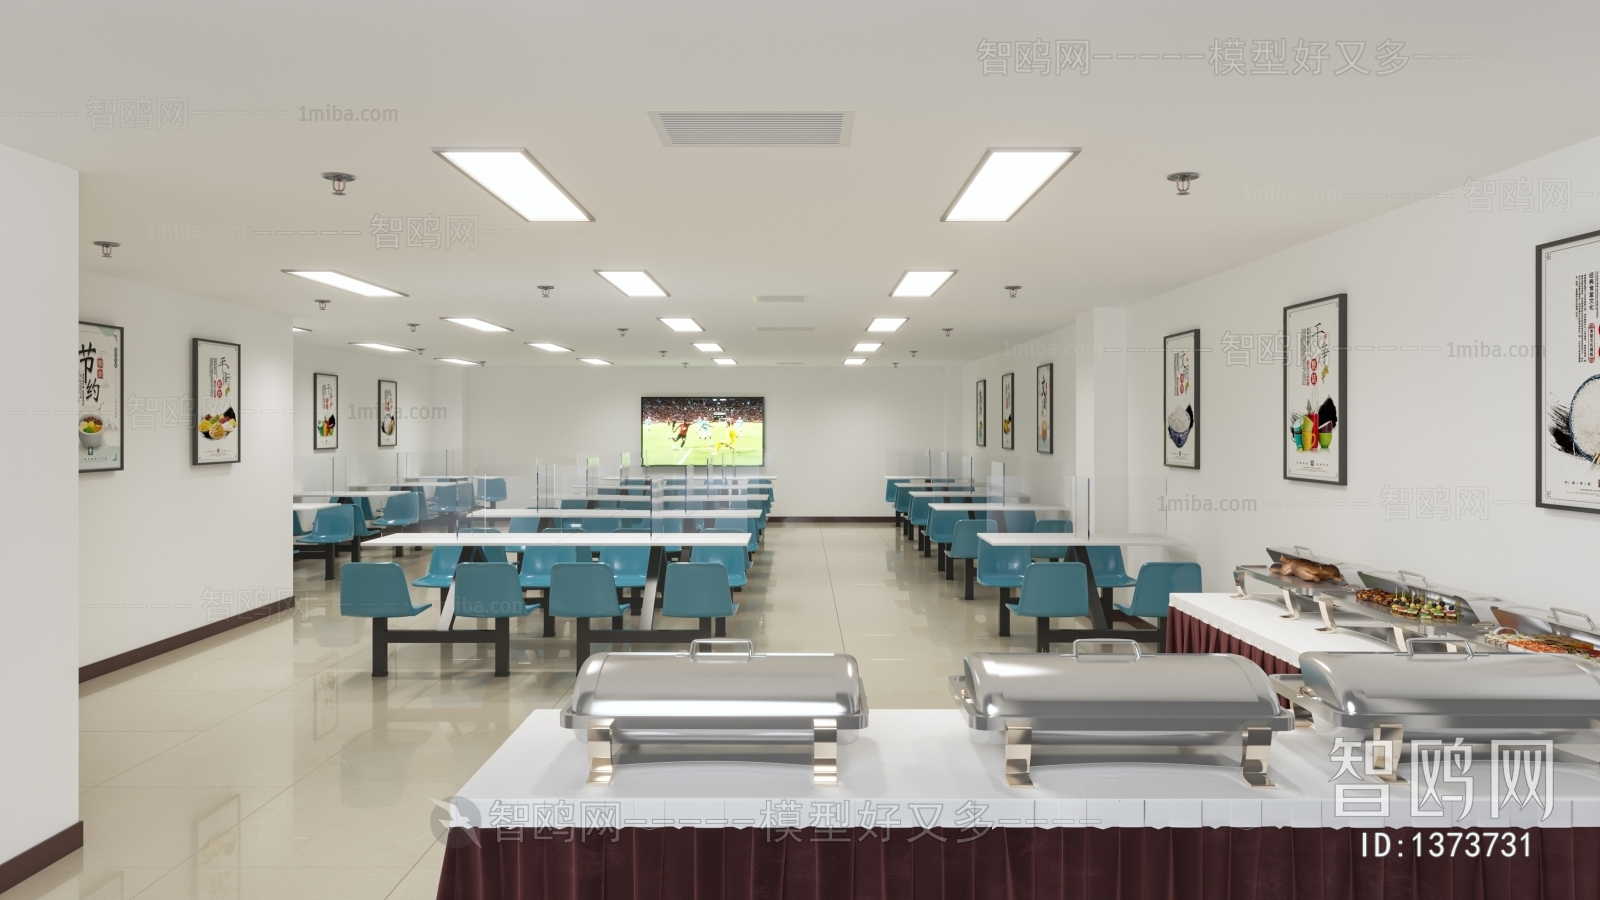 Modern Catering Space